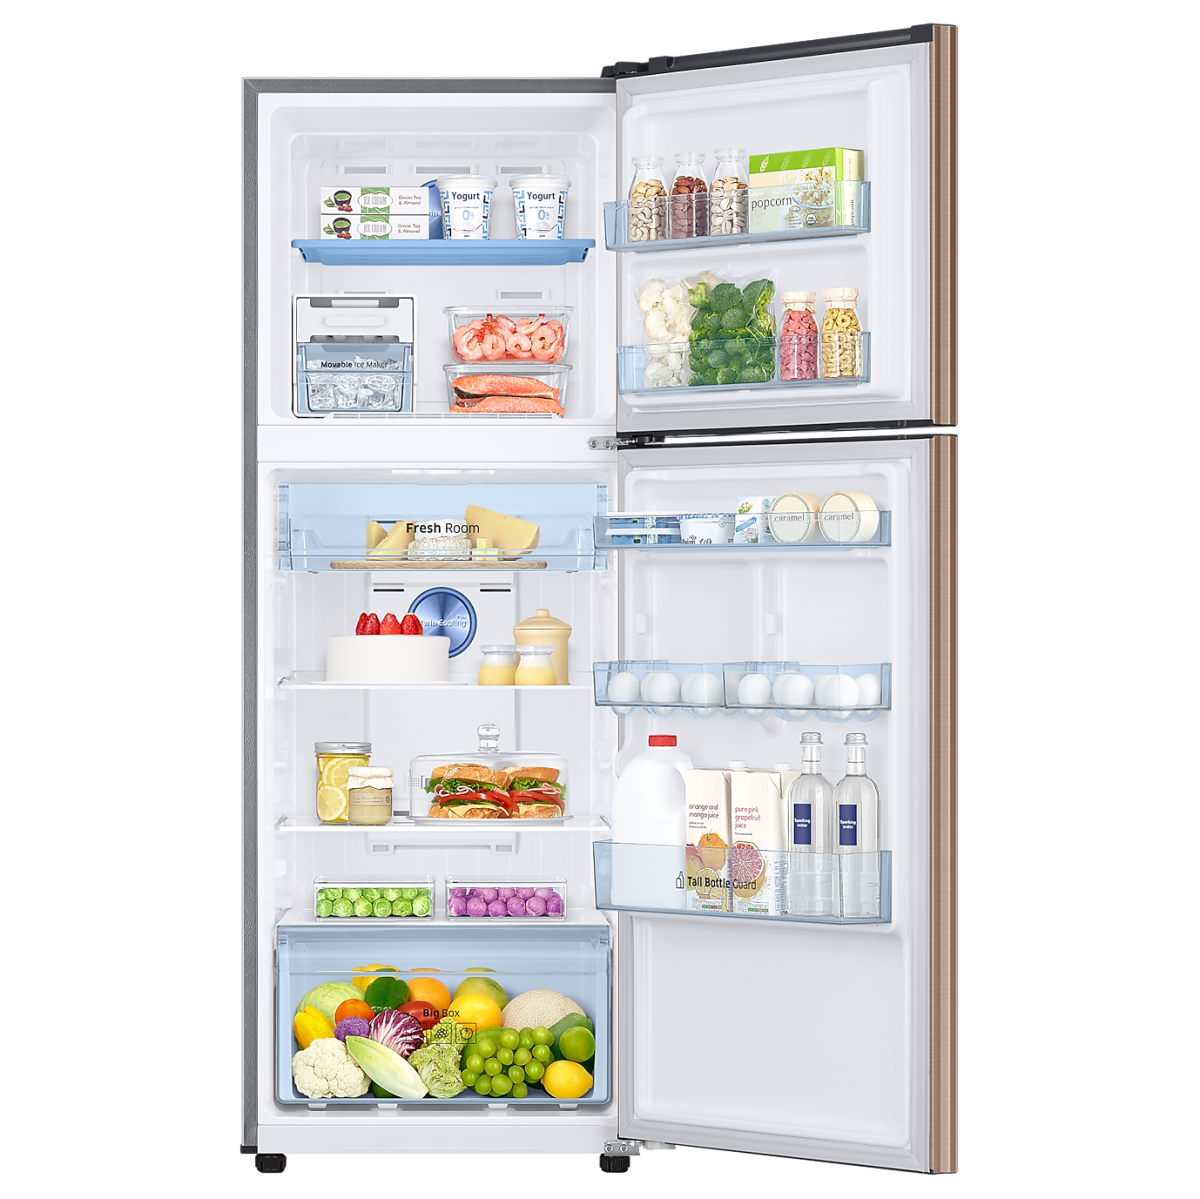 SAMSUNG 345 Liter Inverter Top Mount Refrigerator with 5 in 1 Convertible Mode RT37K5532DX/D3 Best Refrigerators of Year, Top-rated Refrigerators, Refrigerator Reviews, Refrigerator Comparison, Buying a Refrigerator Guide, Refrigerator Deals and Offers